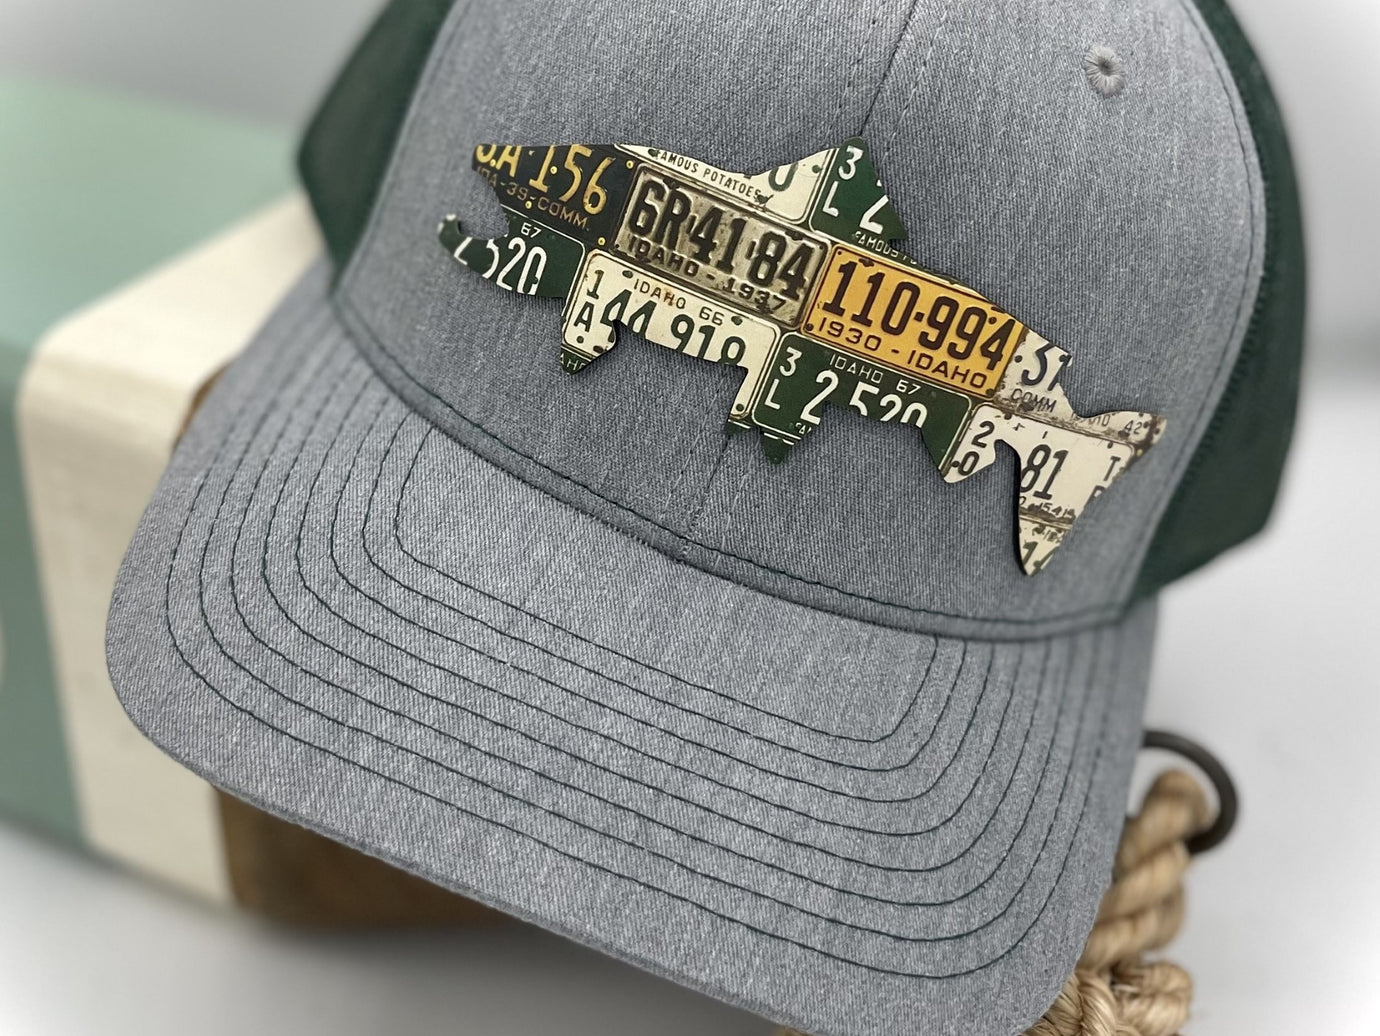 Idaho Brown Trout Hat Collection